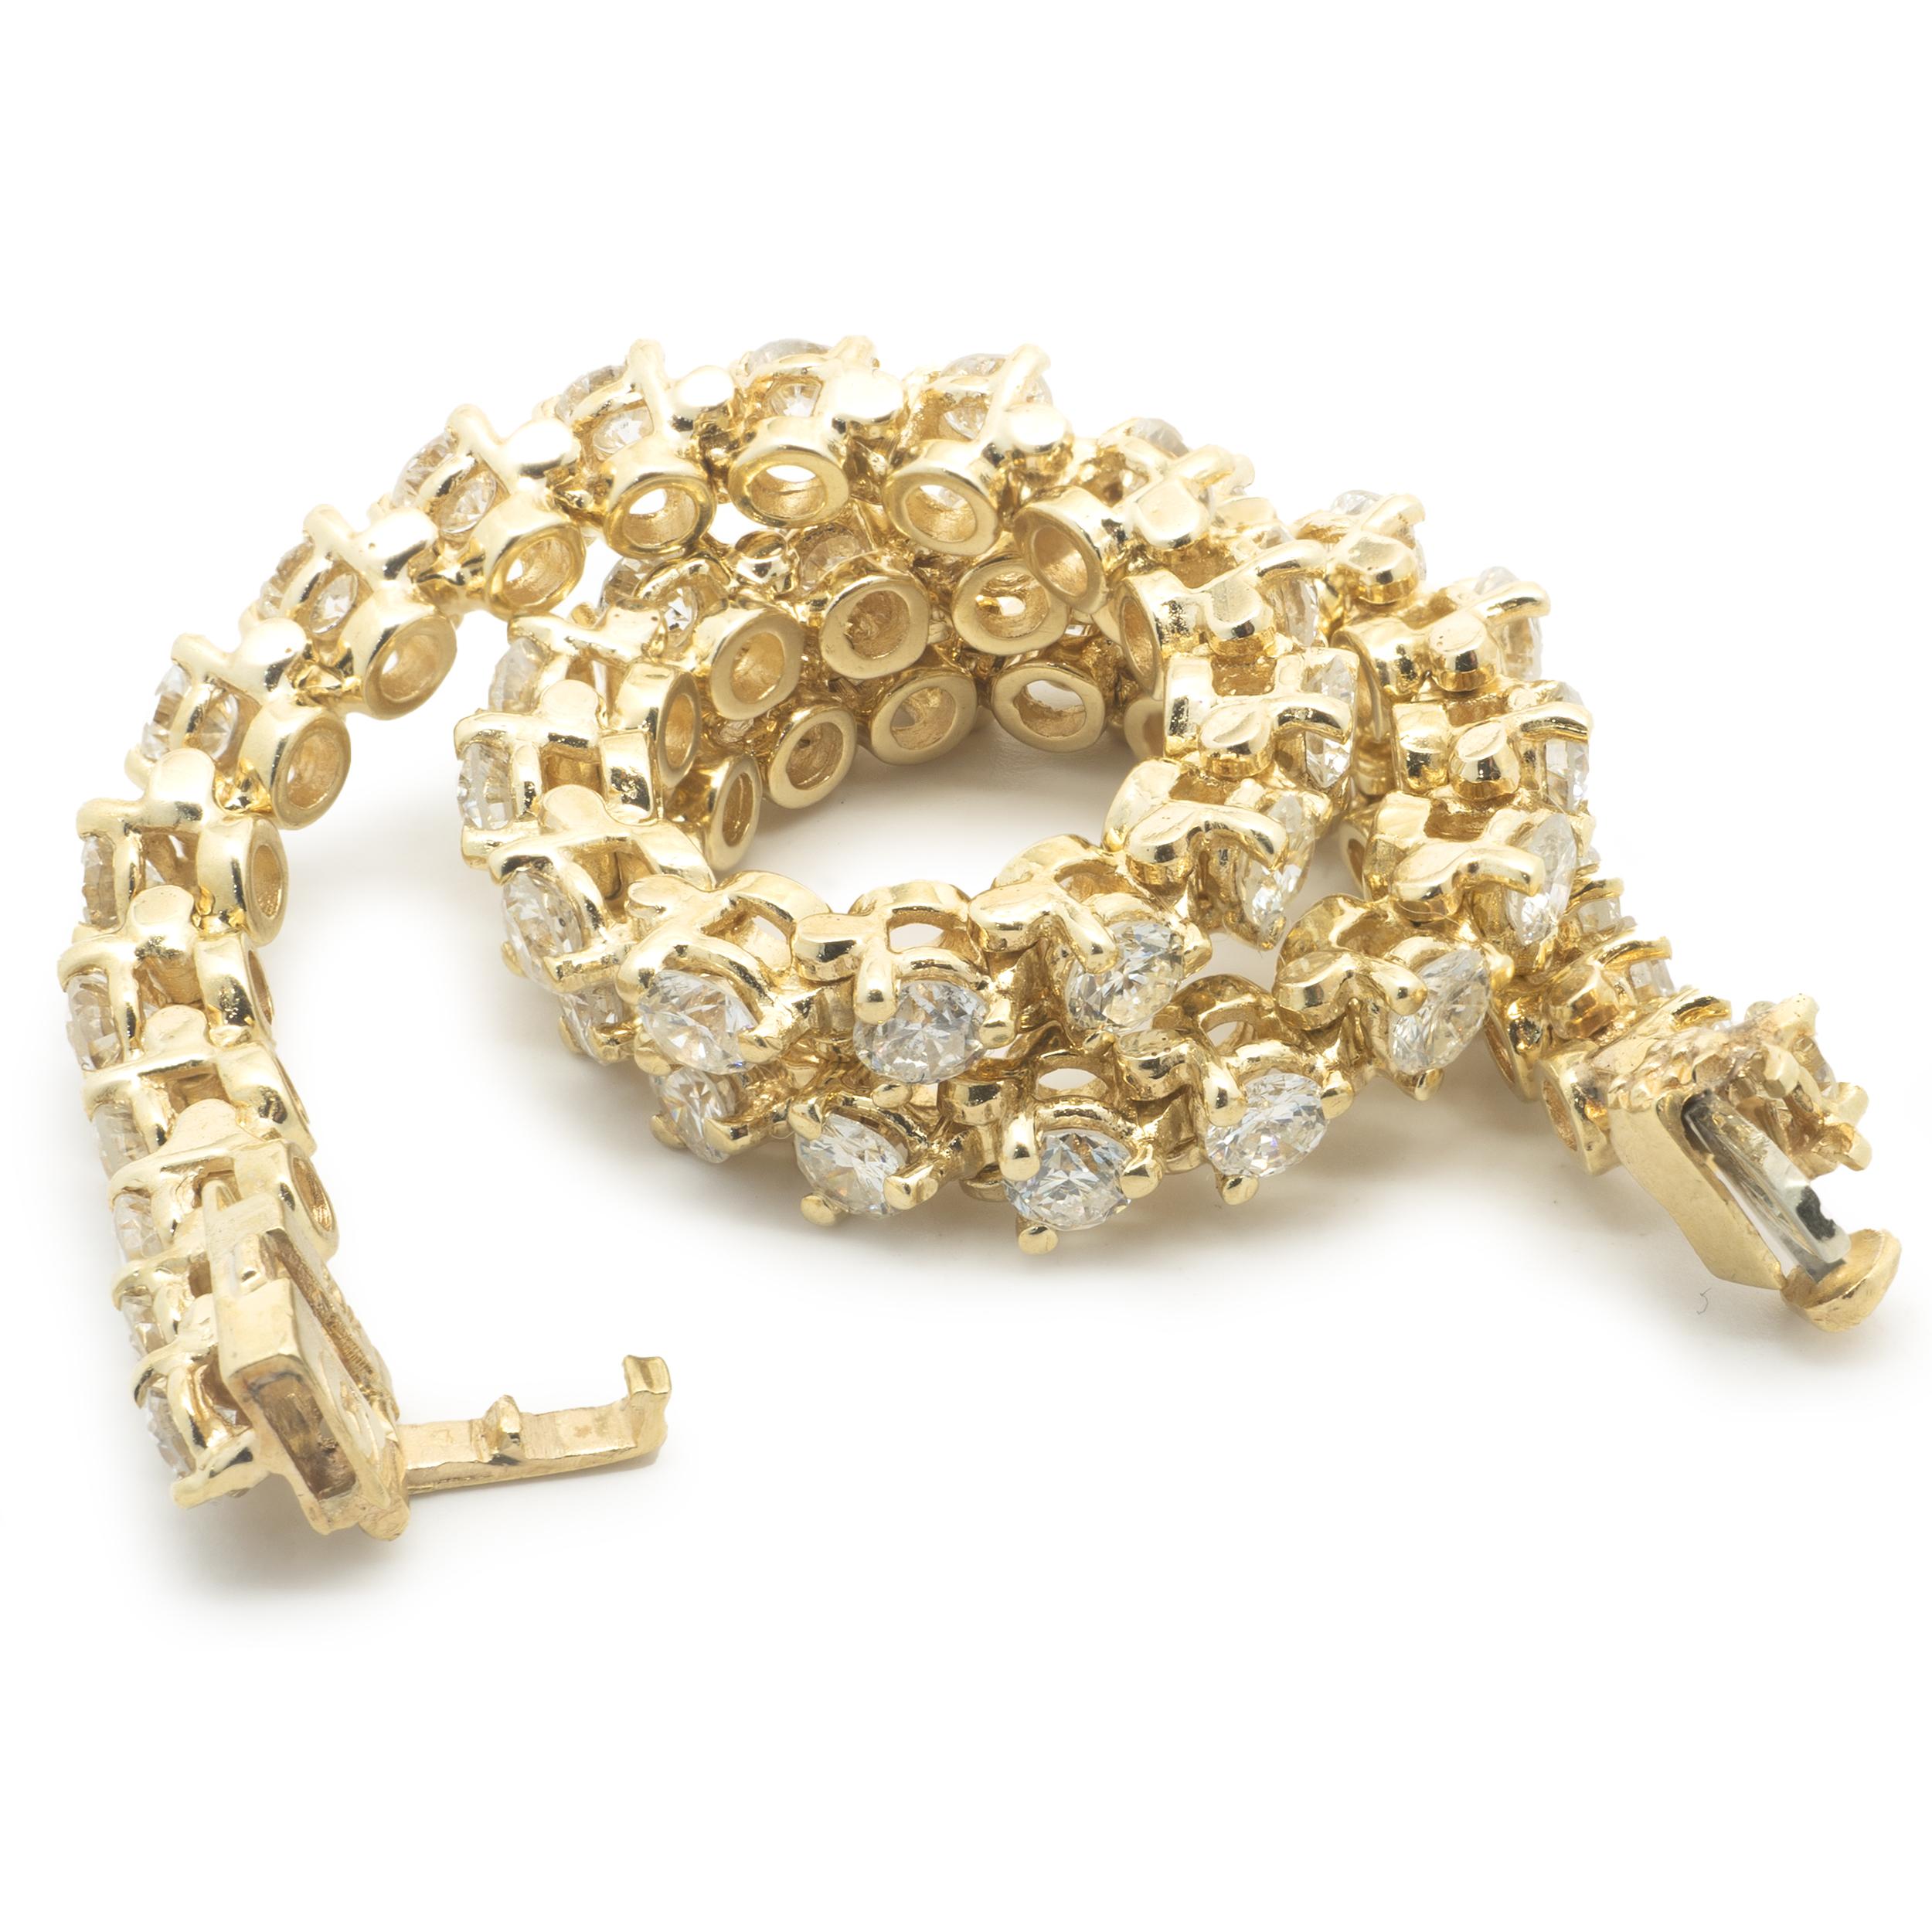 Designer: custom
Material: 14K yellow gold
Diamonds: 48 round brilliant cut = 3.36cttw
Color: H
Clarity: SI1-2
Dimensions: bracelet will fit up to an 7-inch wrist
Weight: 11.20 grams
